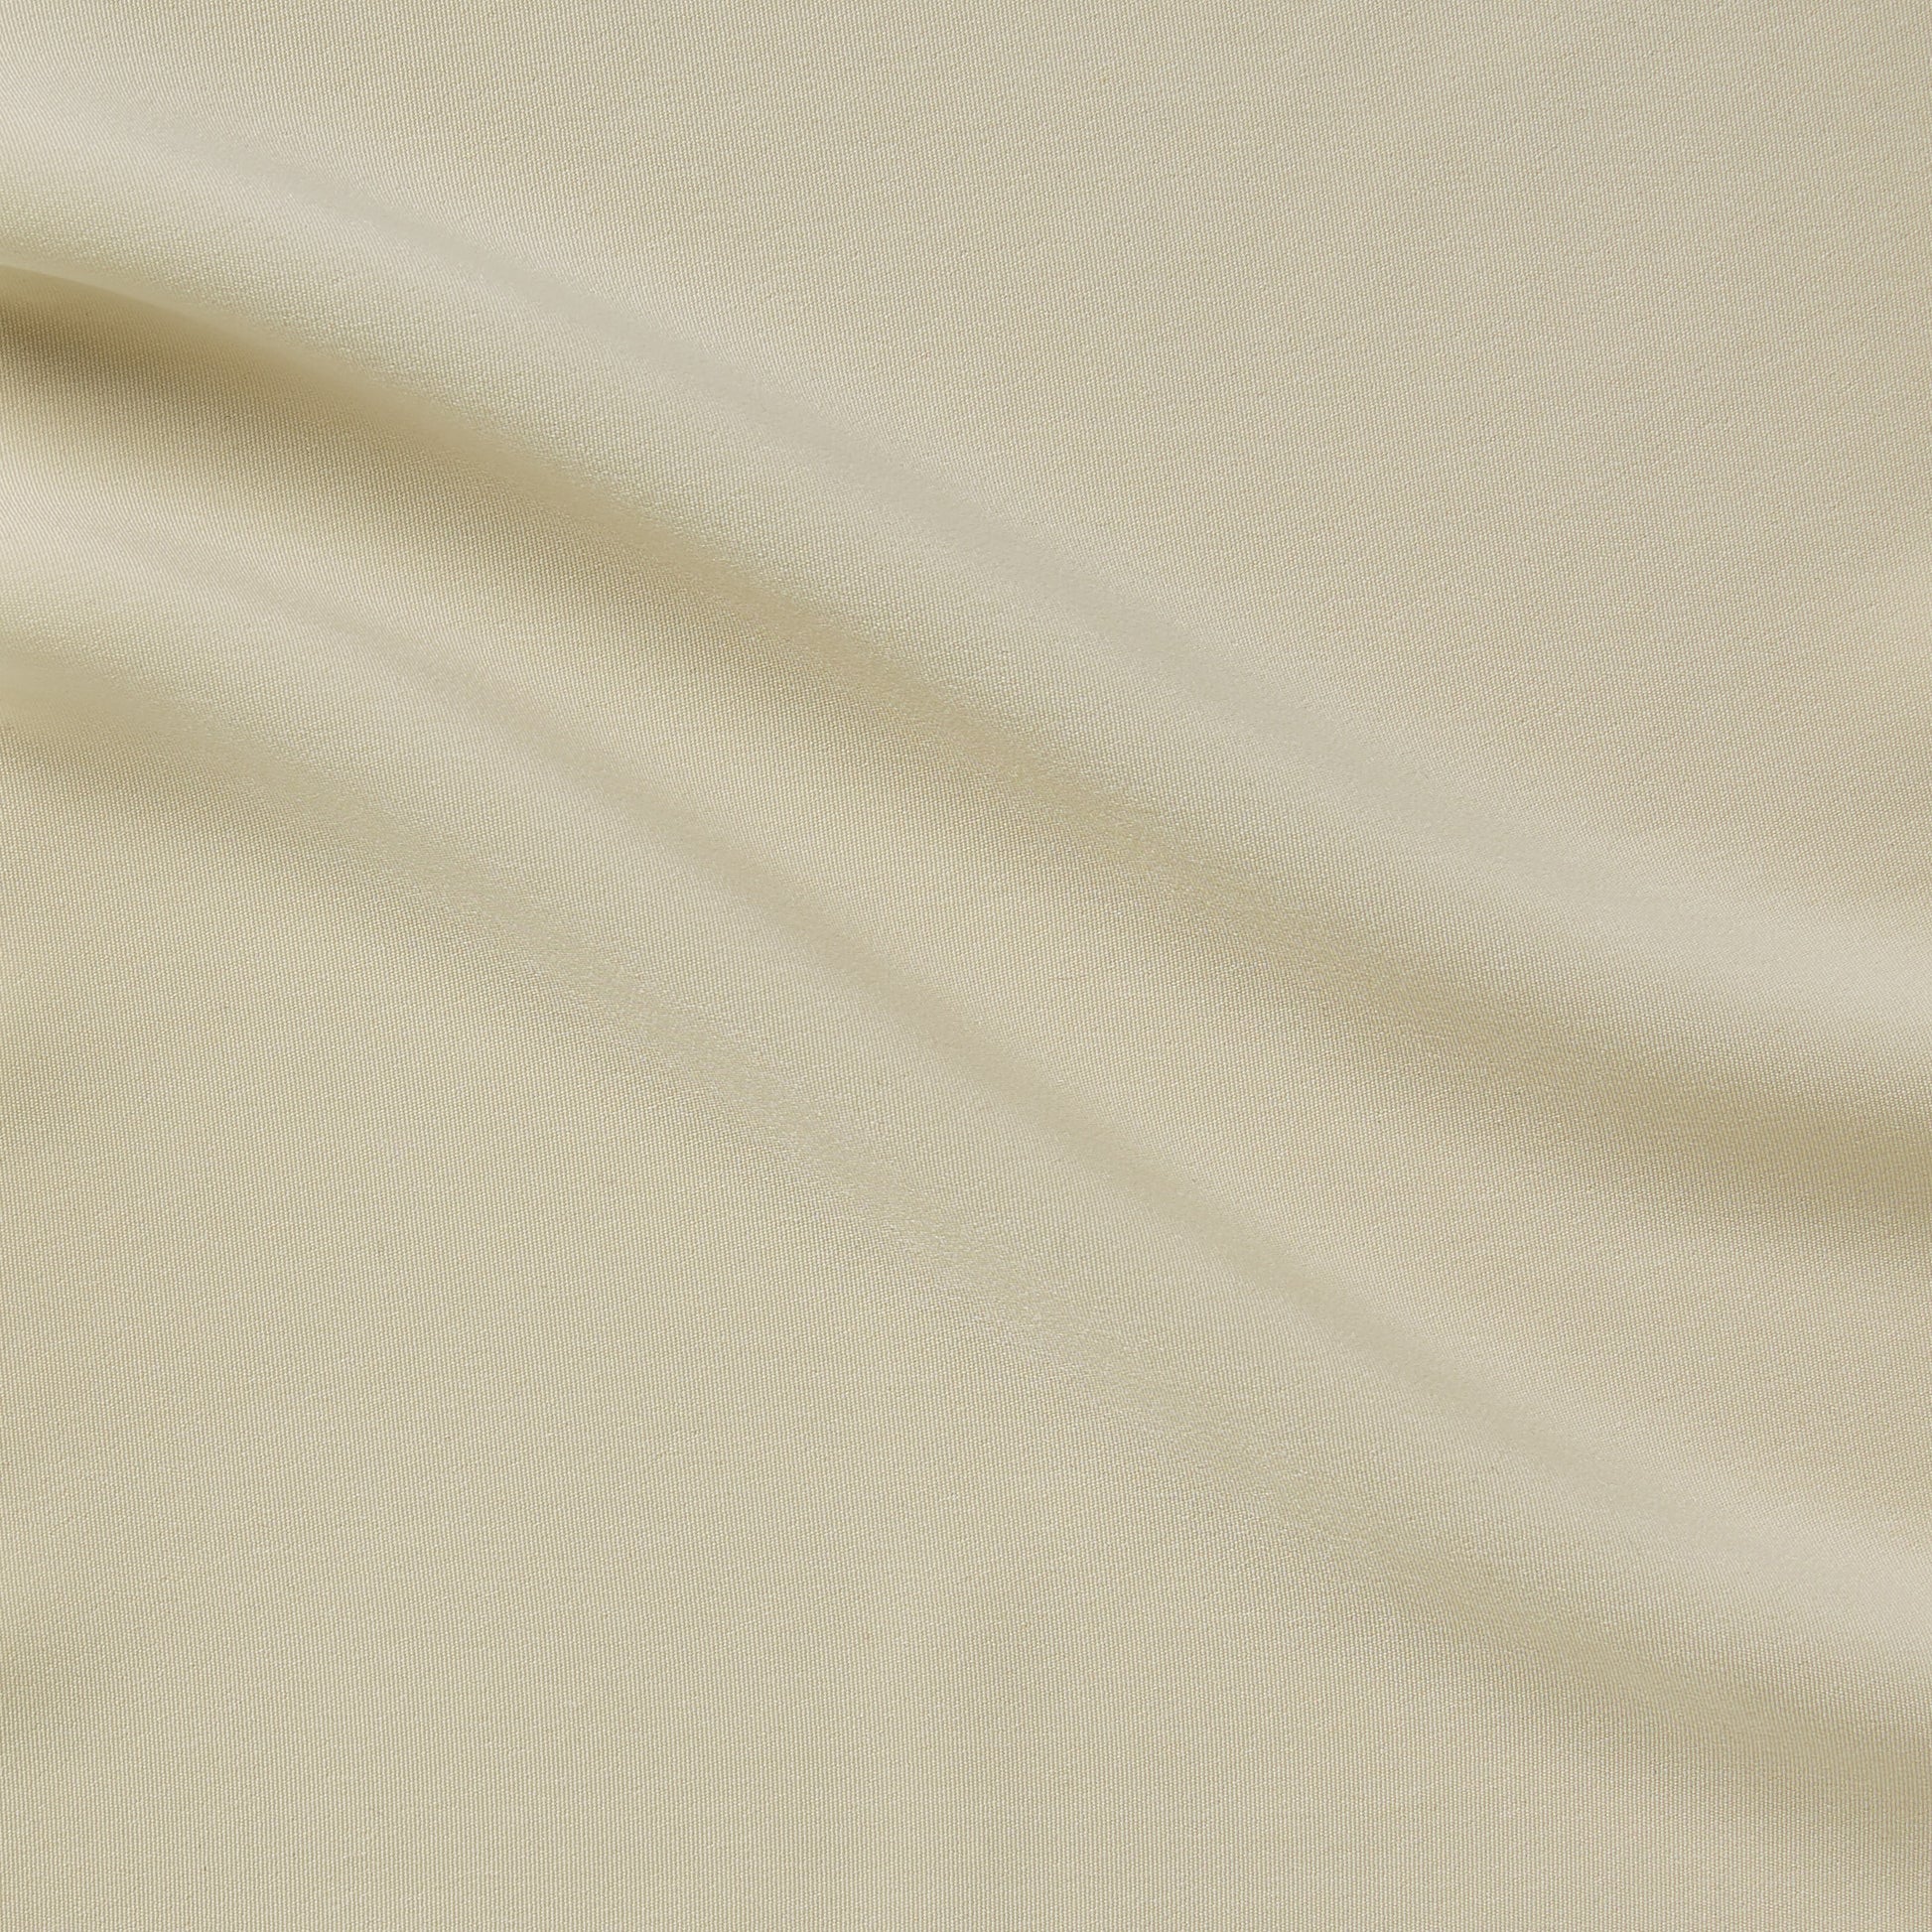 sistine featuring the string color version of a soft and smooth pure polyester with silky hand feel and fluid drape